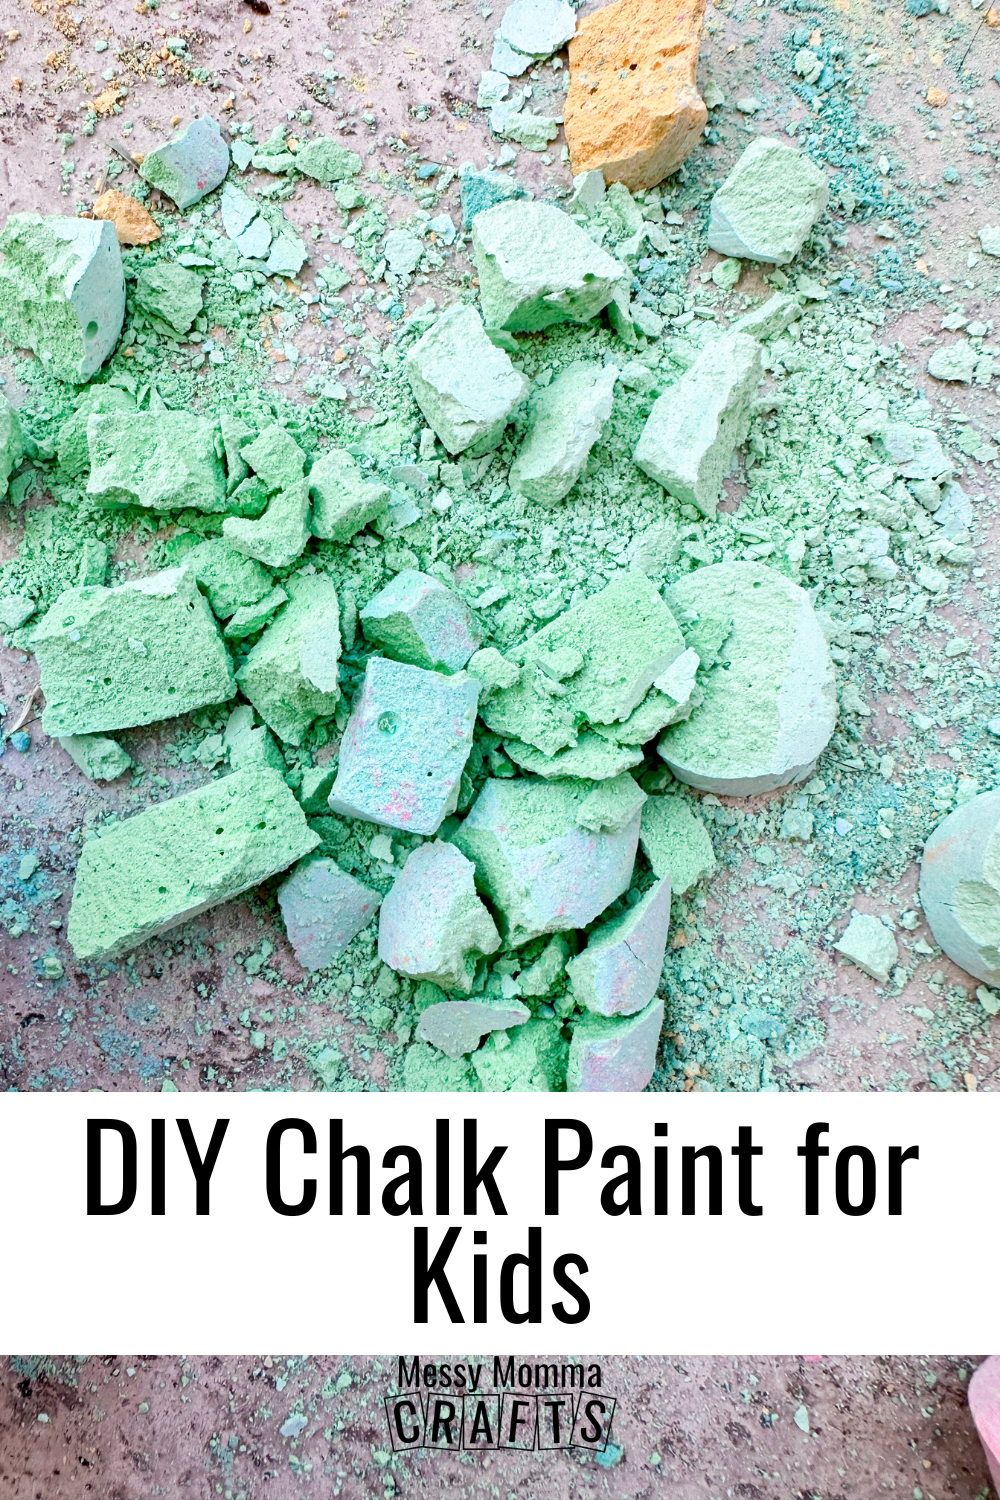 Broken chalk pieces in green and blue